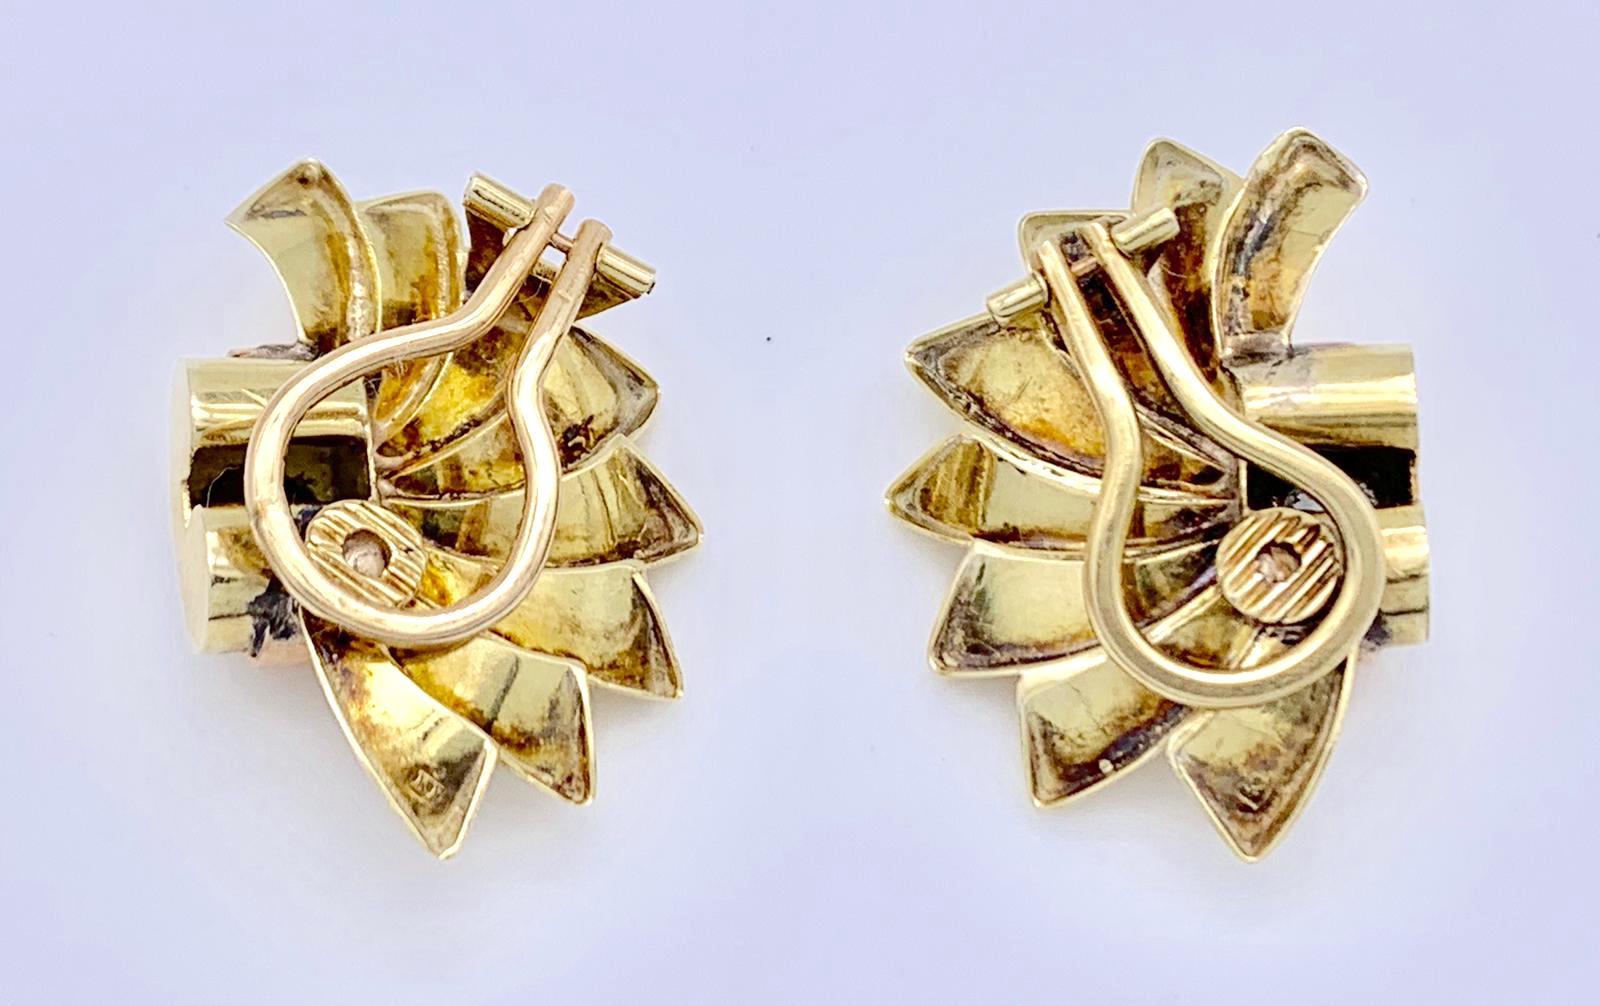 This very stylish pair of Retro diamond ear clips is elegant and flattering. The flamboyant sun burst design has been executed in yellow and red 14 karat gold. The total weight of the diamonds is 0.70 carat ca. The earrings are the work of a Czech